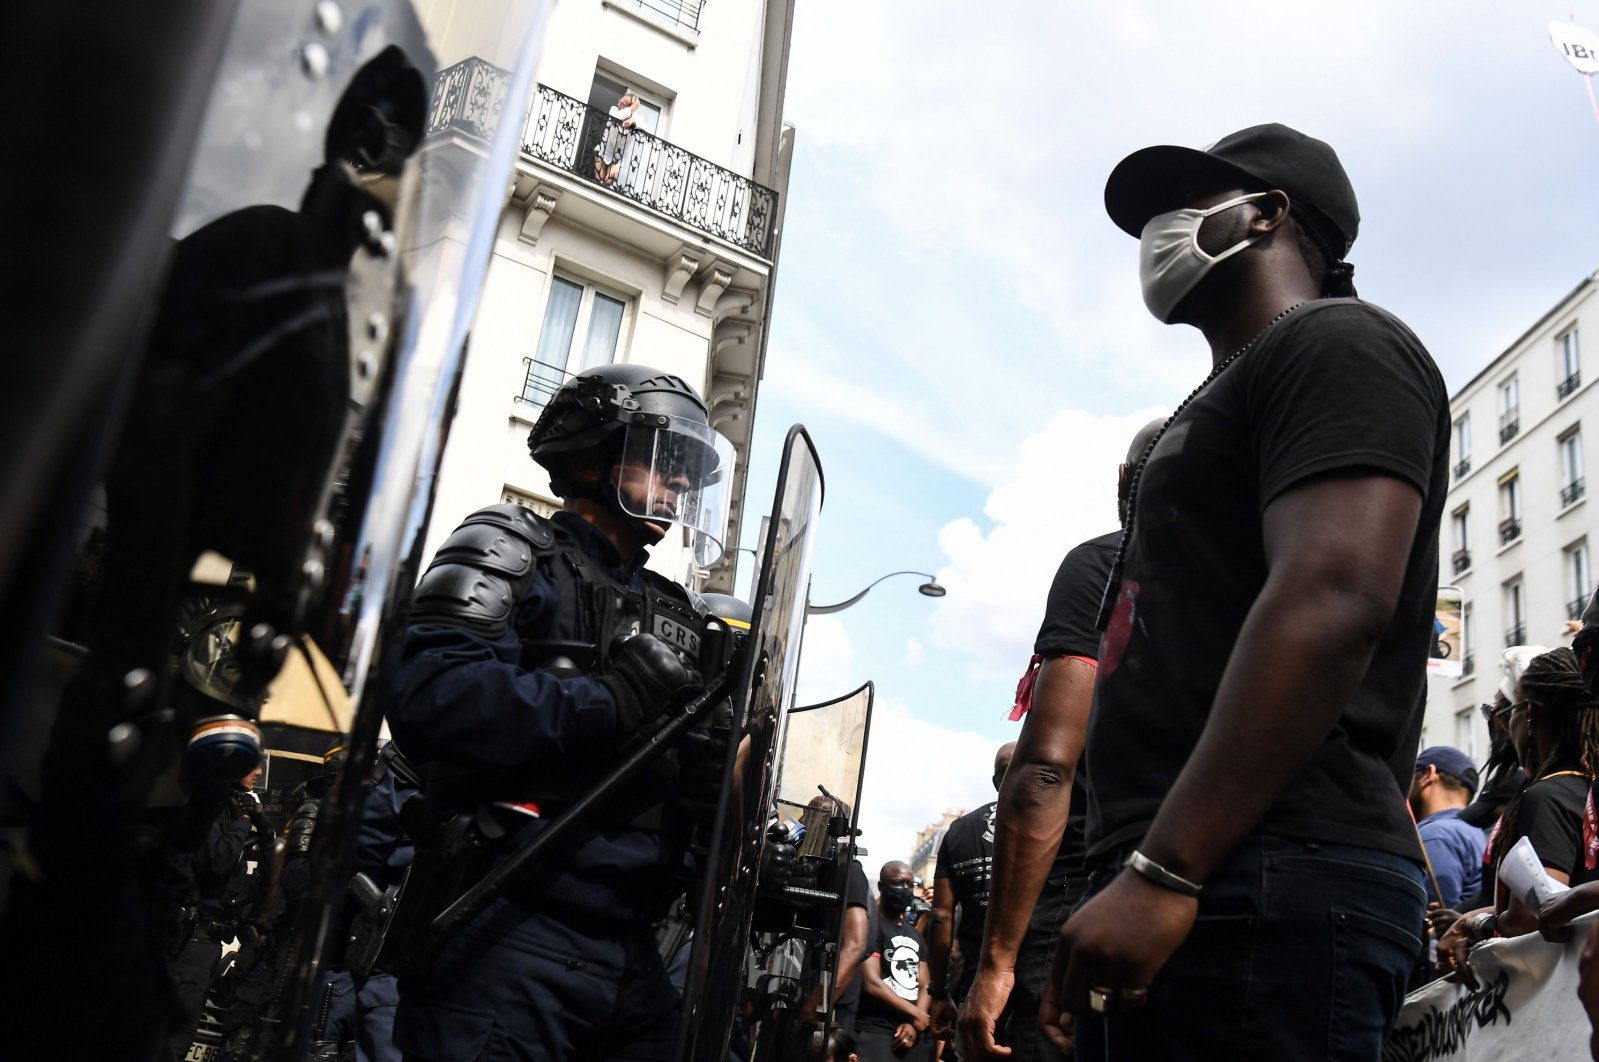 A protester wearing a face mask stands in front of police during a demonstration against racism and police brutality, in Paris, June 20, 2020. (AFP File Photo)